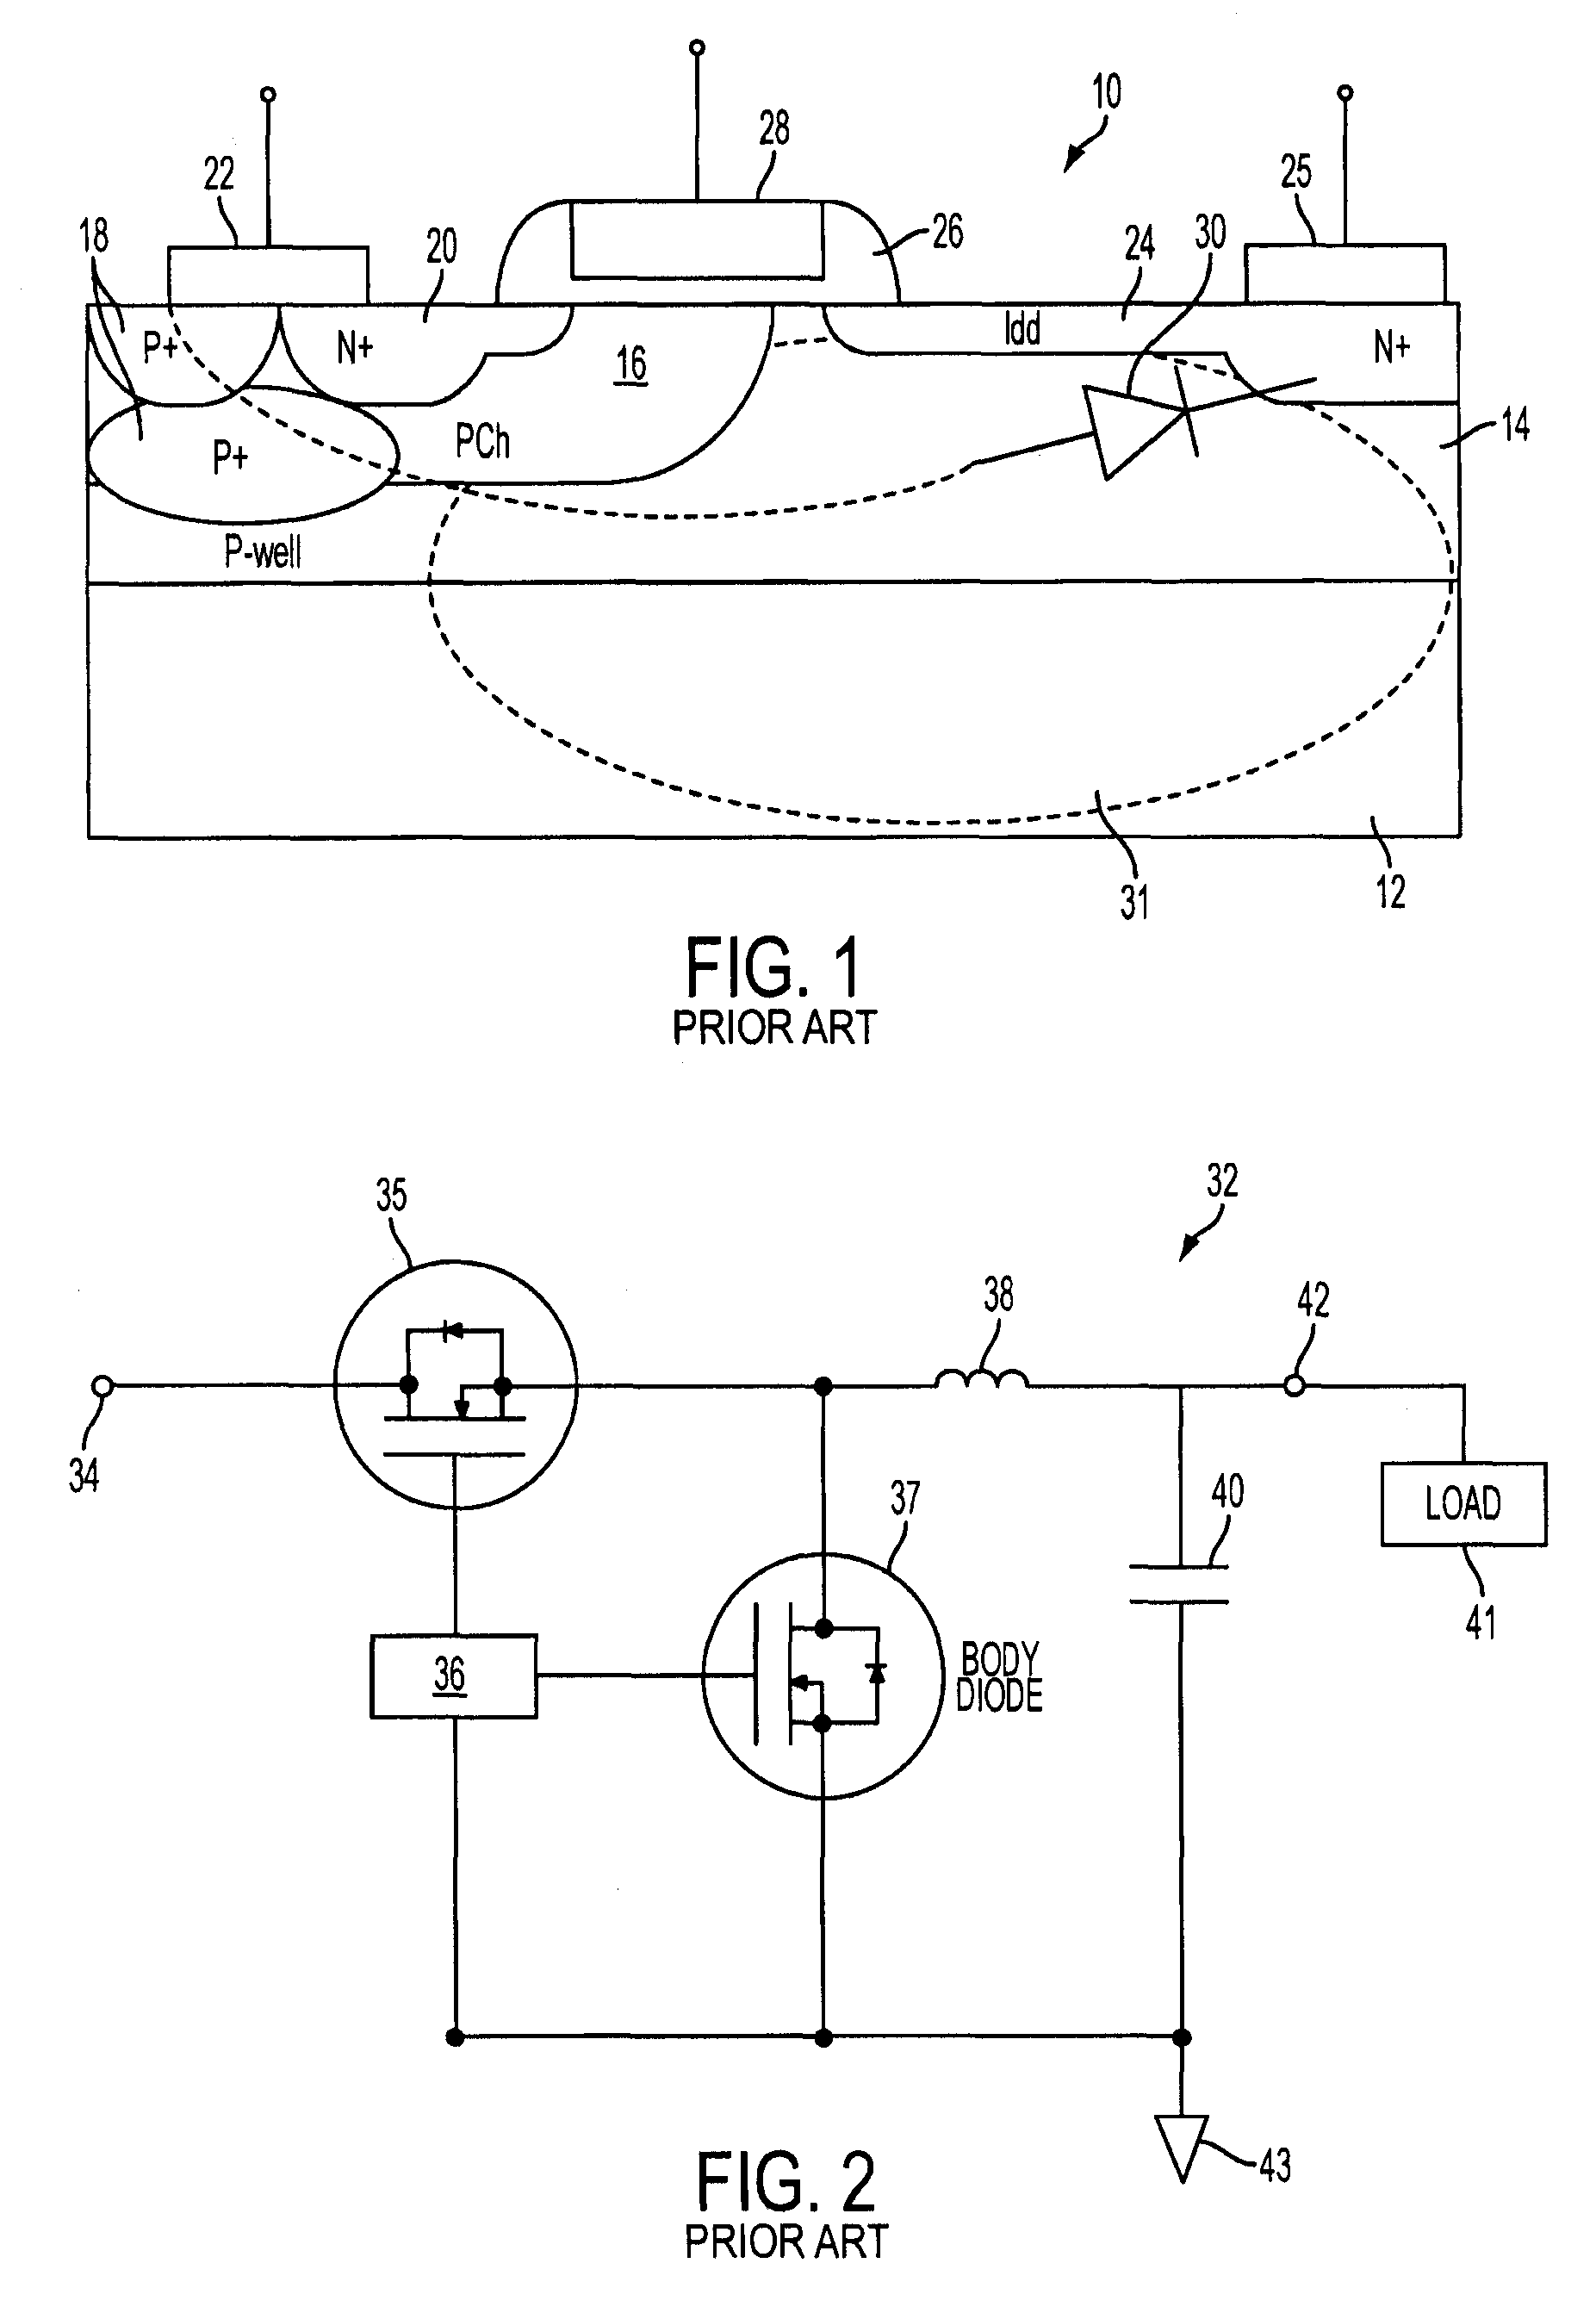 Semiconductor Device and Method of Forming Lateral Power MOSFET with Integrated Schottky Diode on Monolithic Substrate